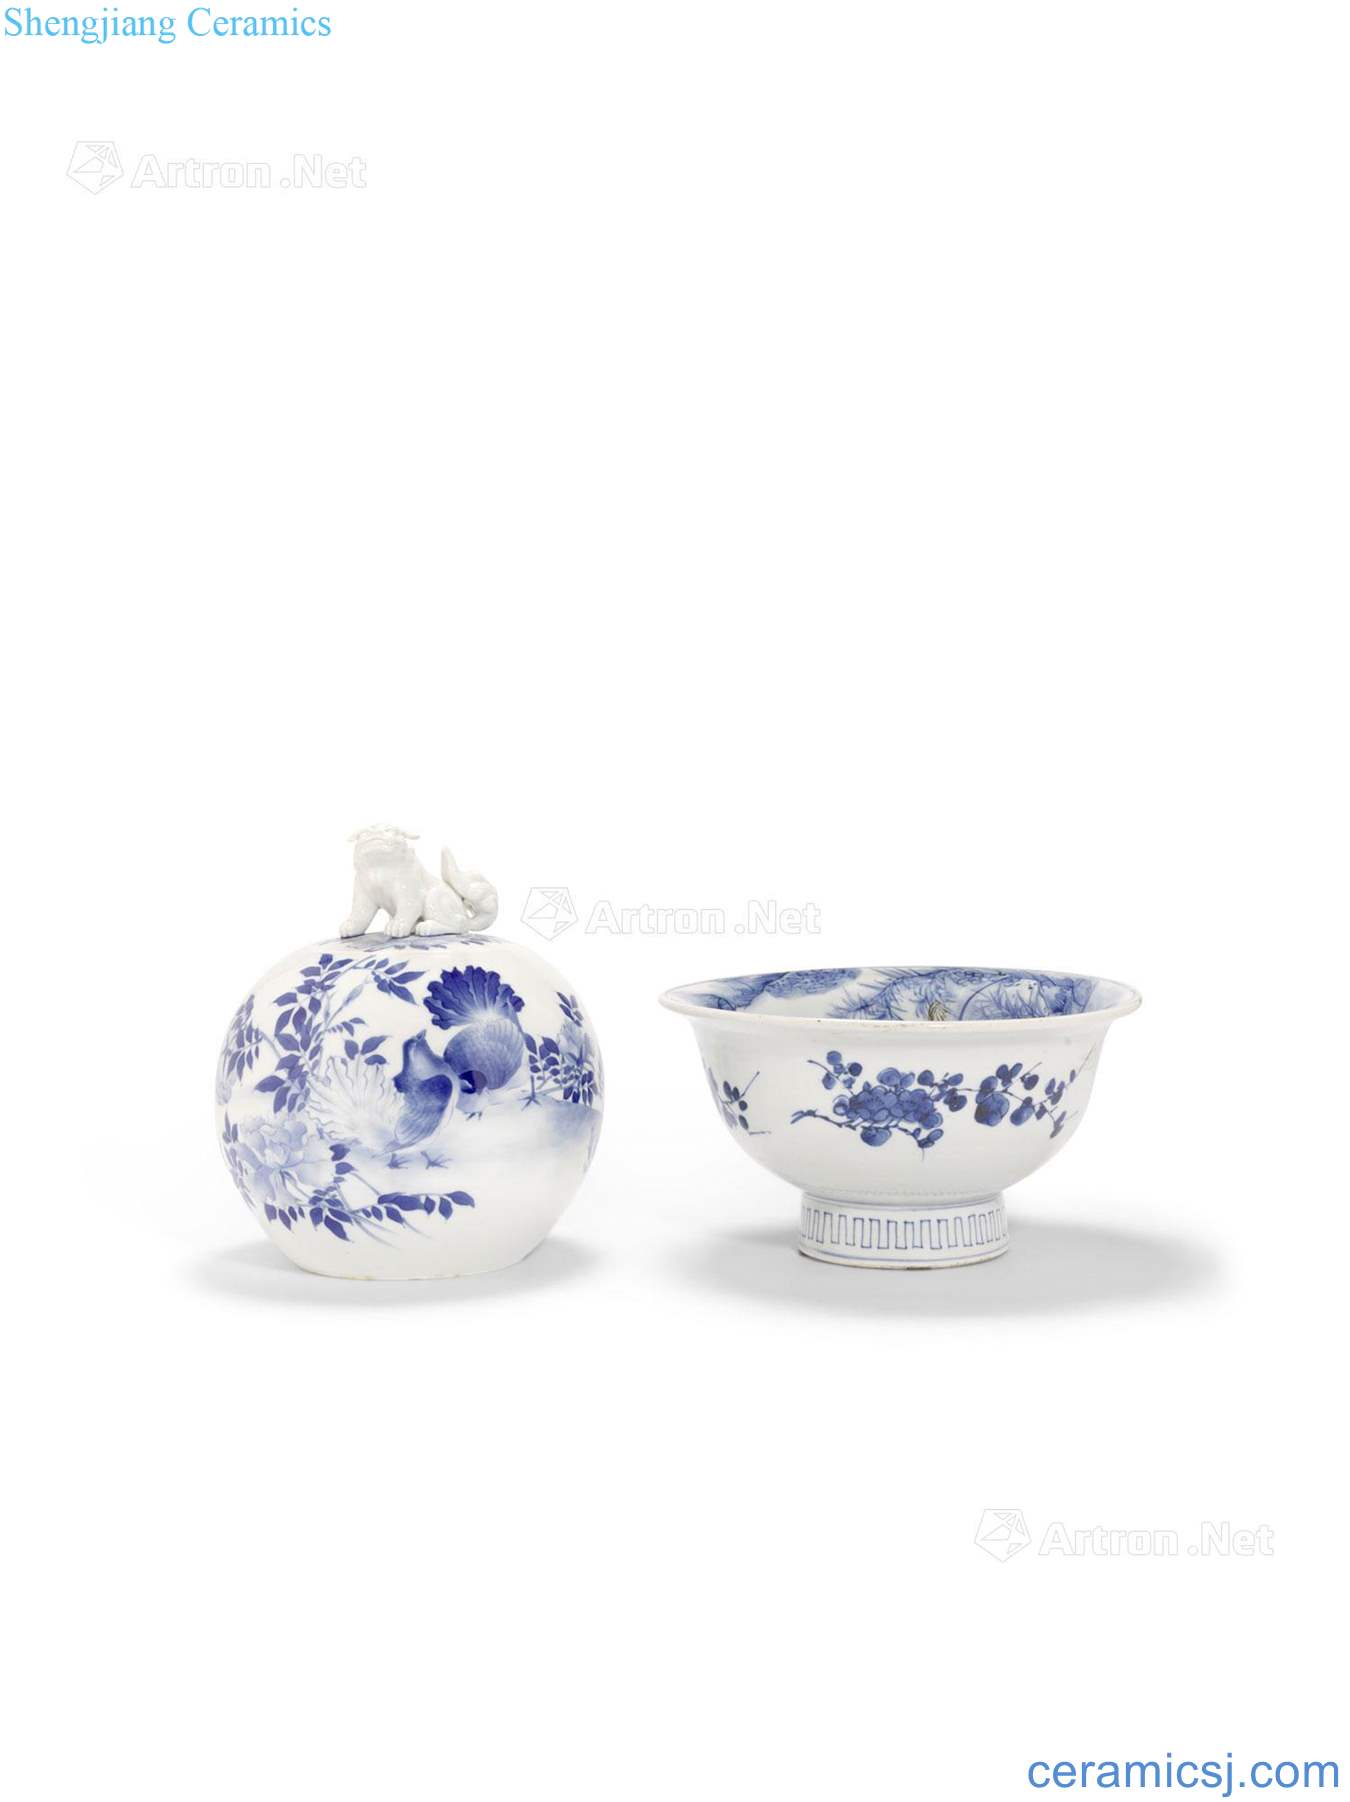 The 19 th century TWO BLUE - AND - WHITE PORCELAIN VESSELS